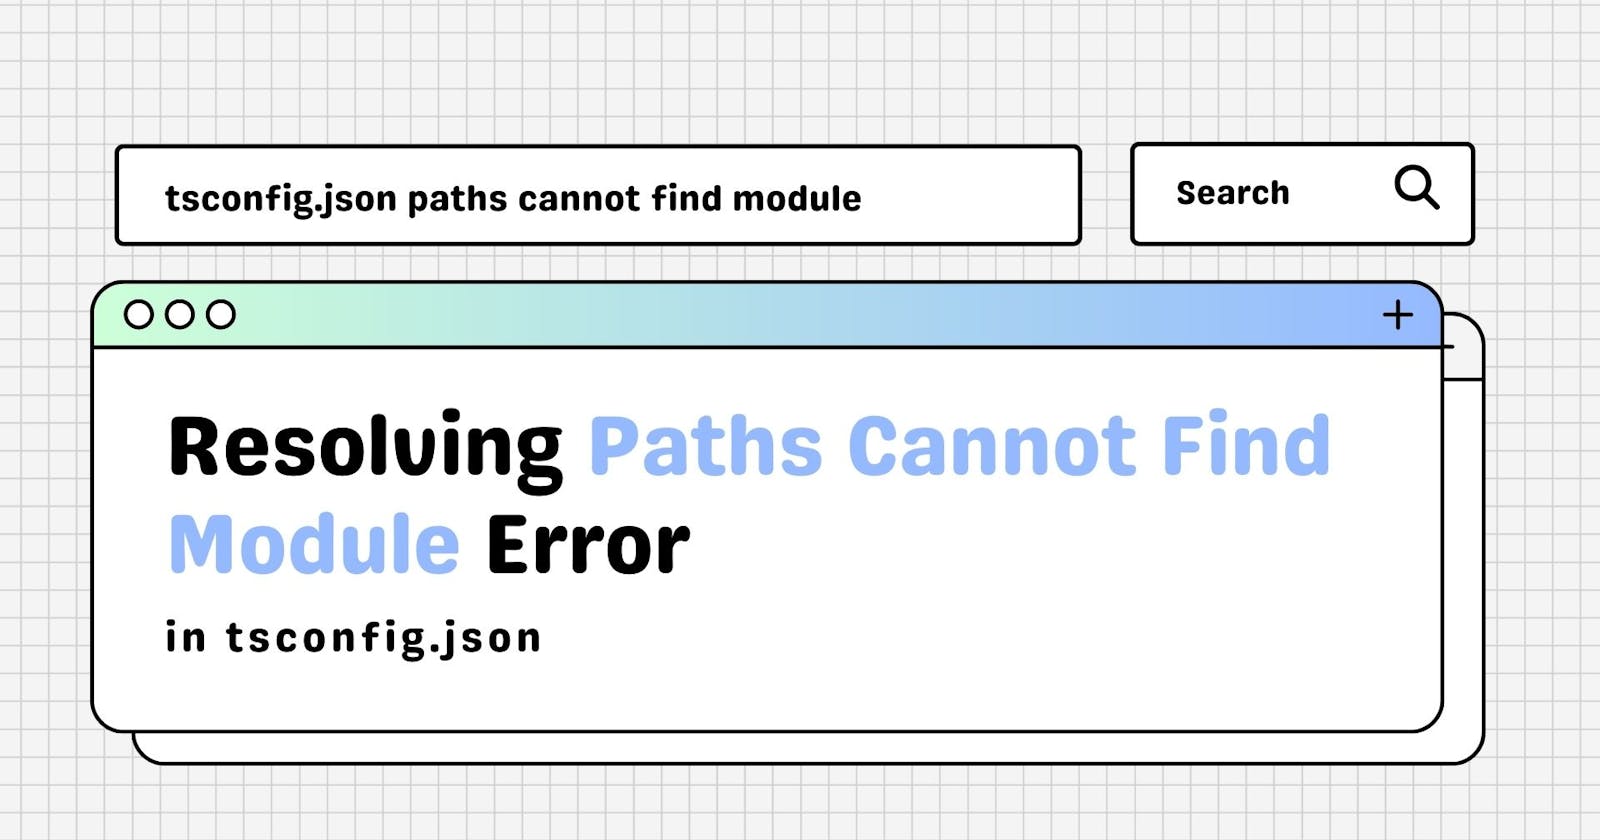 Resolving "Paths Cannot Find Module" Error in tsconfig.json